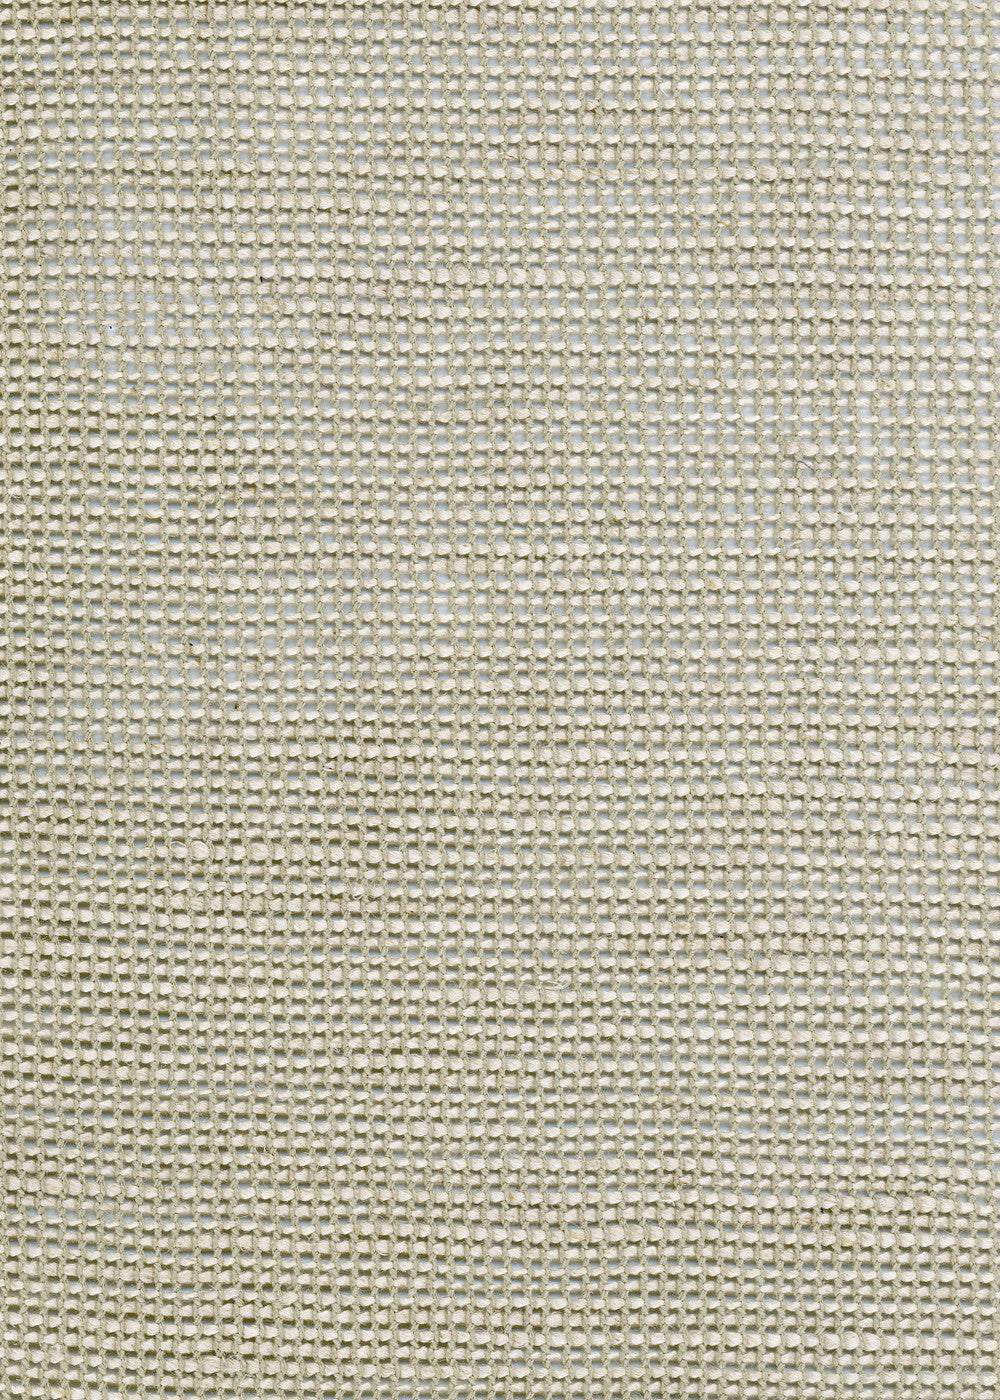 off-white linen fabric with an open weave